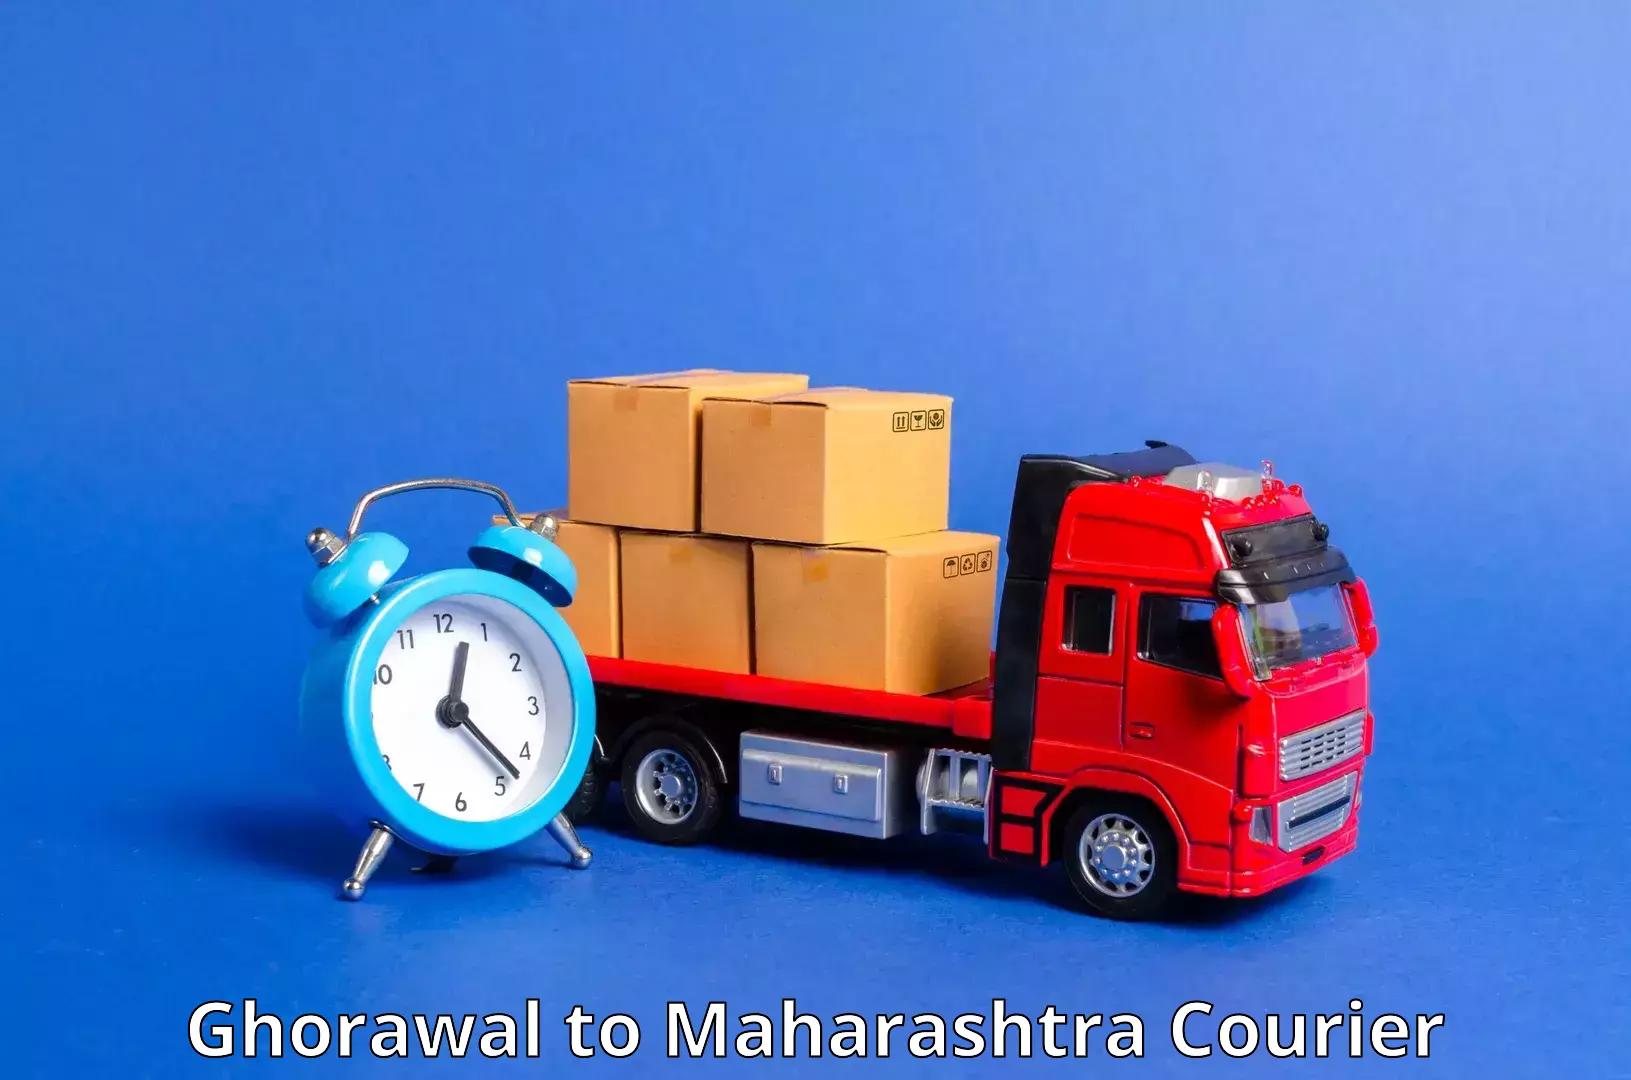 On-call courier service in Ghorawal to Kudus